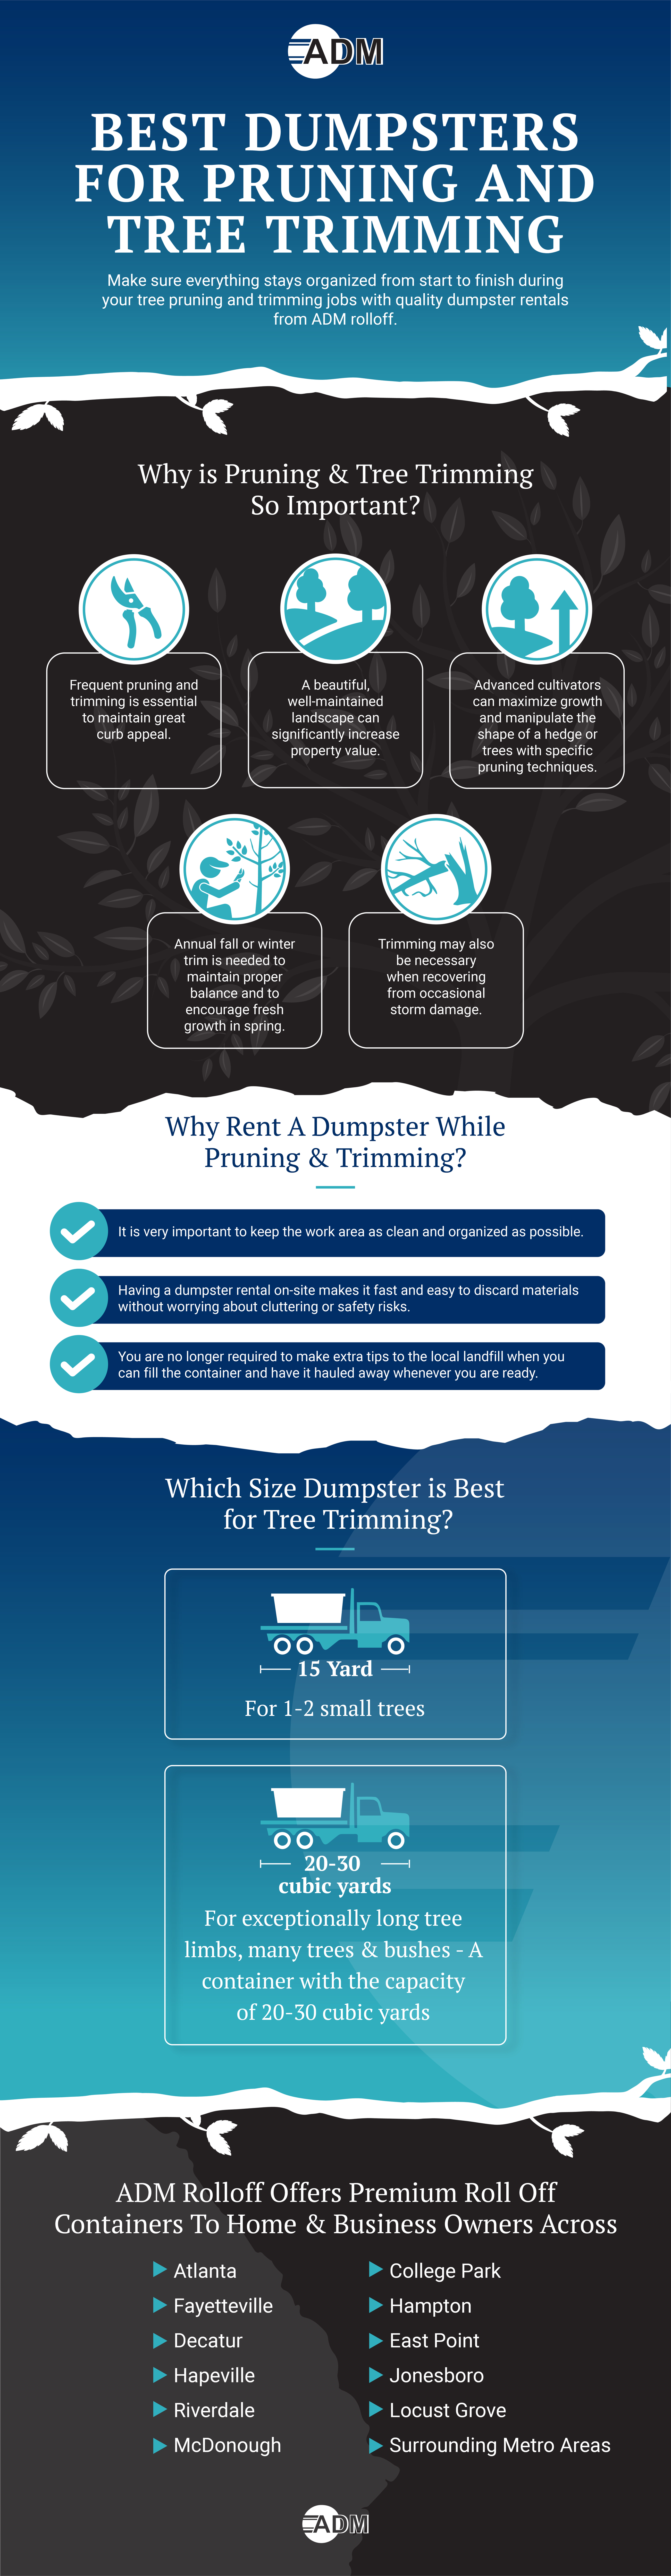 Best Dumpsters For Pruning And Tree Trimming